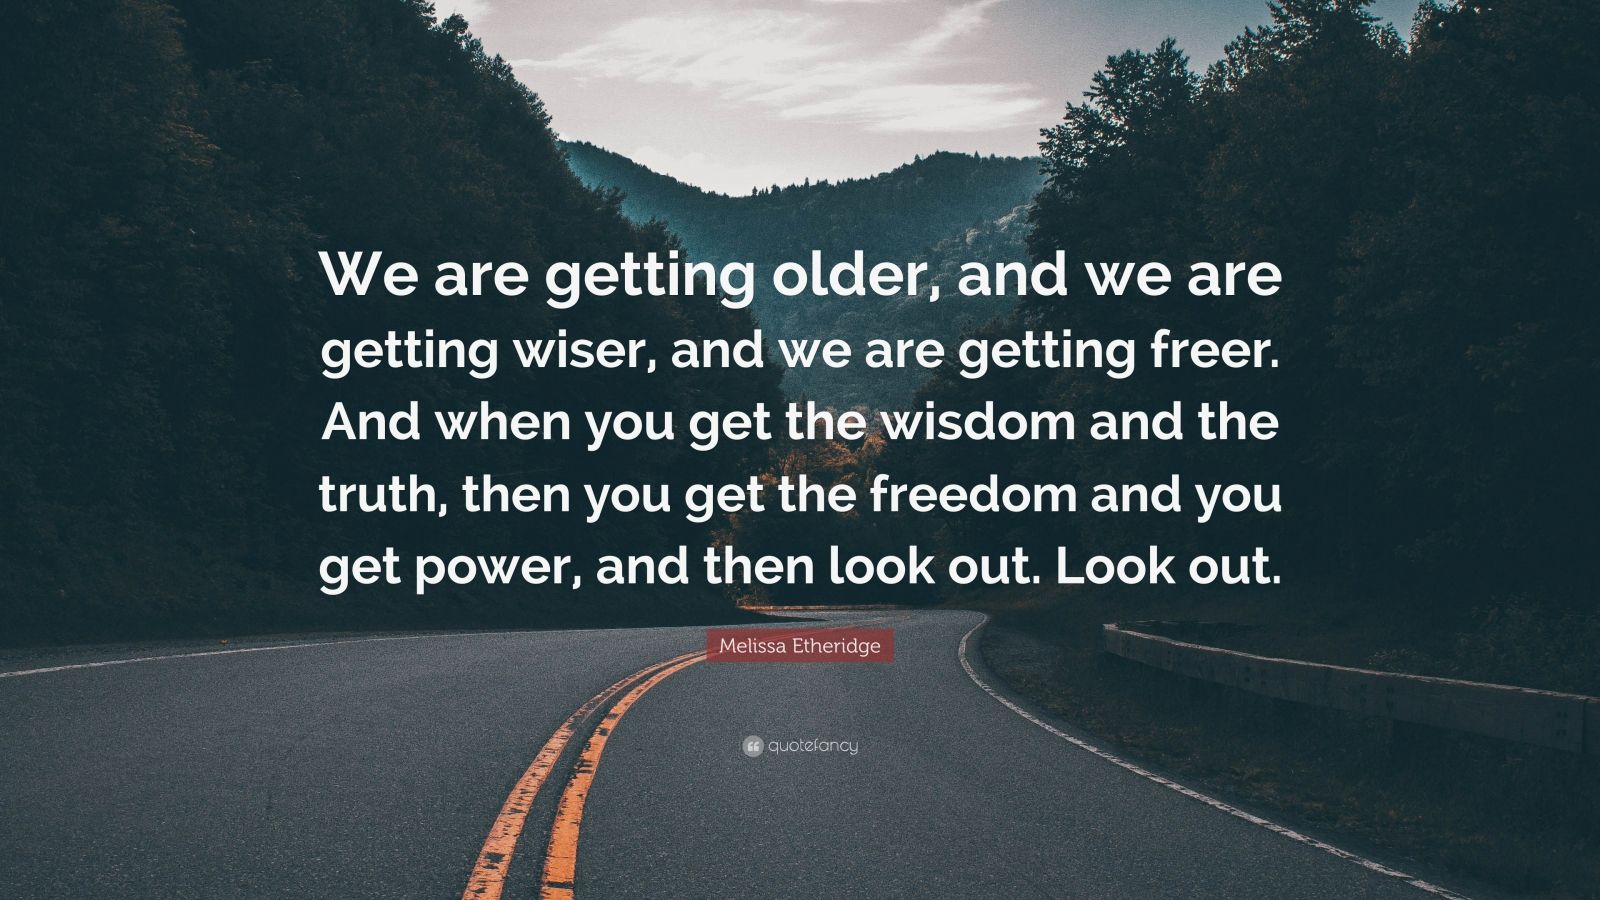 Melissa Etheridge Quote “We are getting older, and we are